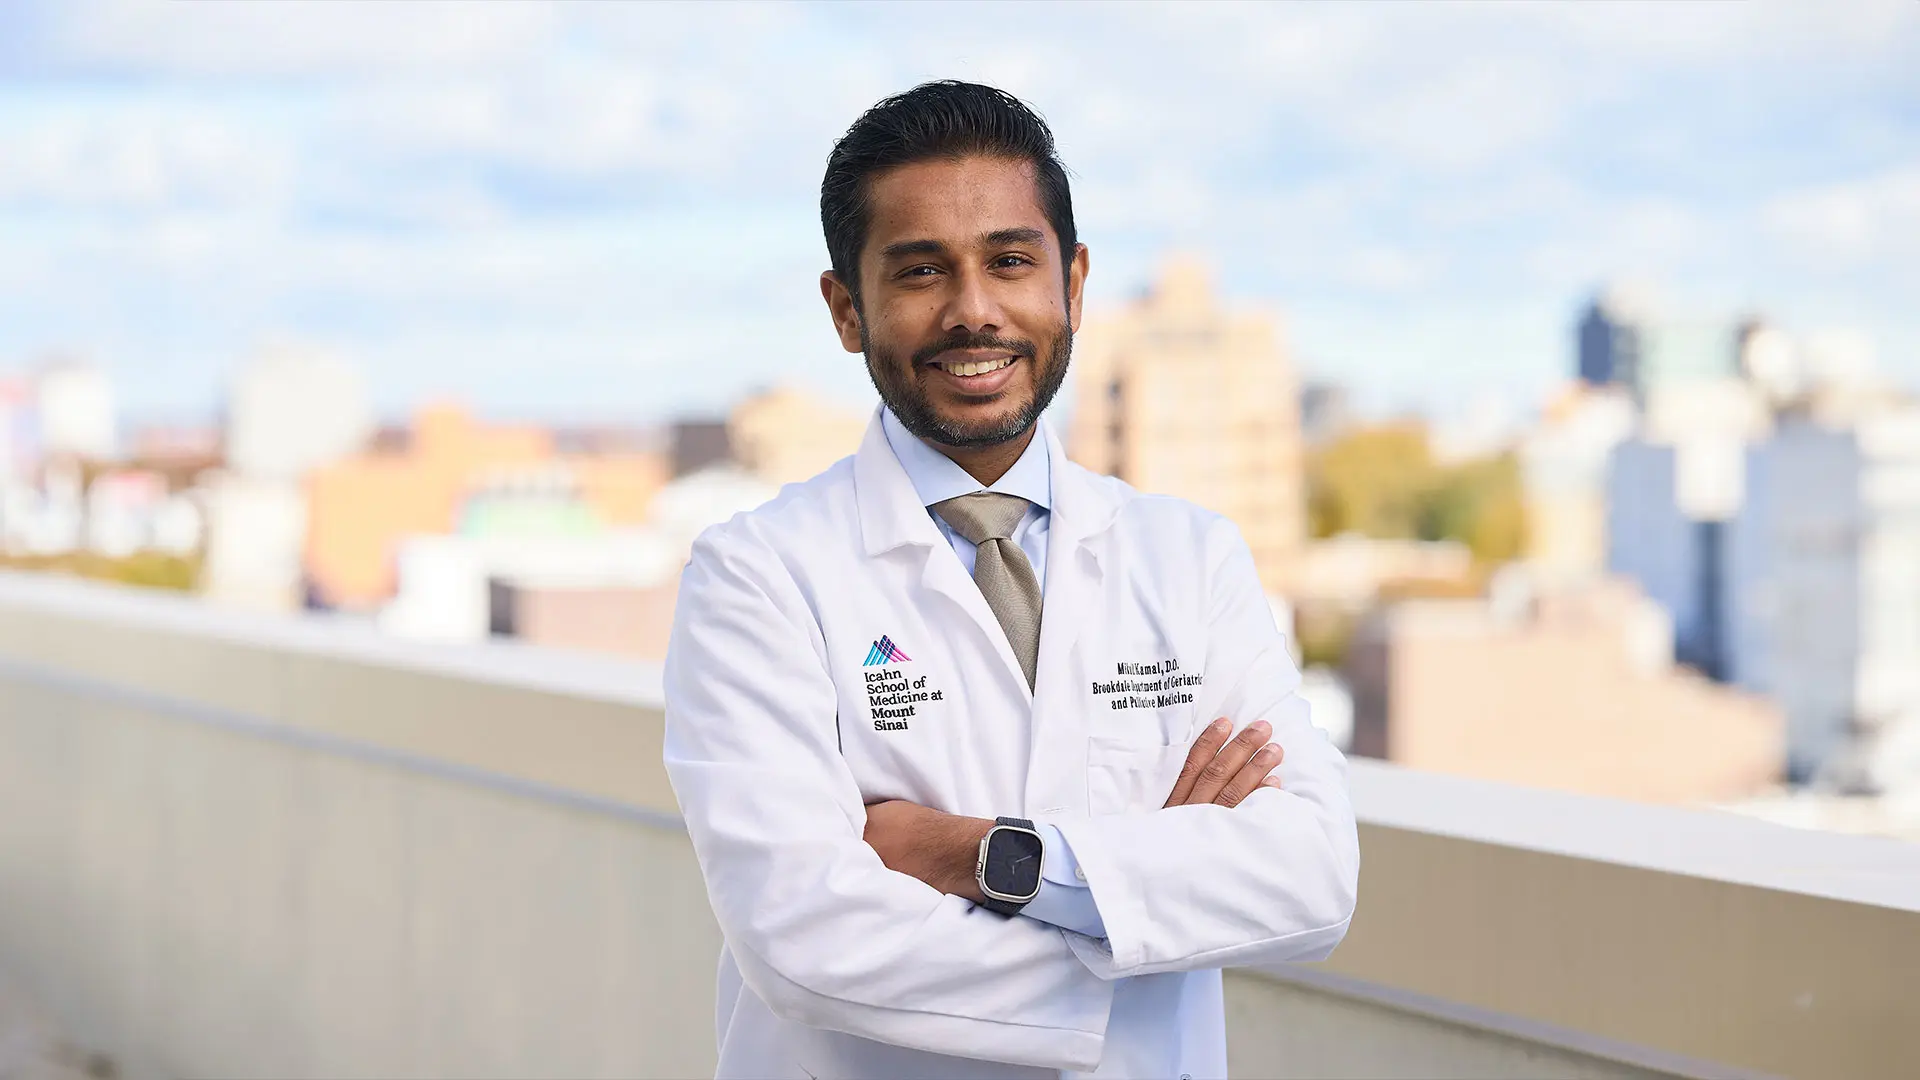 “Part of geriatrics is developing relationships with the family and mitigating the fear people have of doctors,” says Mikail Kamal, DO, a geriatrics and family medicine physician and the first geriatrician working in patient care at Mount Sinai Queens.